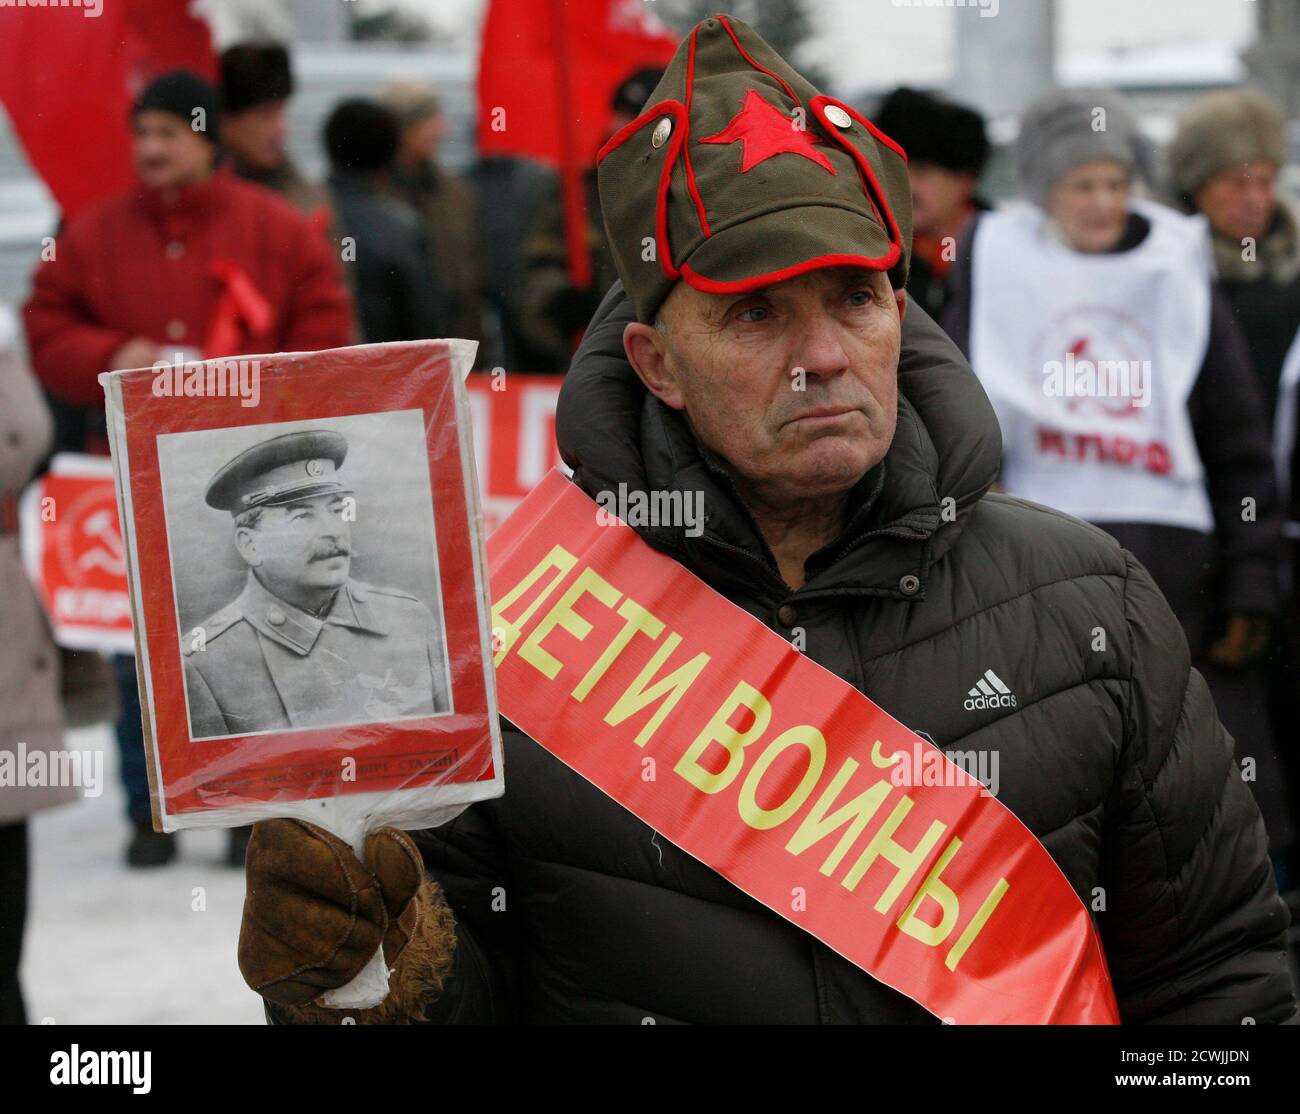 A Communist supporter holds an image of Soviet leader Josef Stalin during a  rally in the centre of Russia's Siberian city of Krasnoyarsk, November 7,  2013. Communist supporters in Russia commemorate the